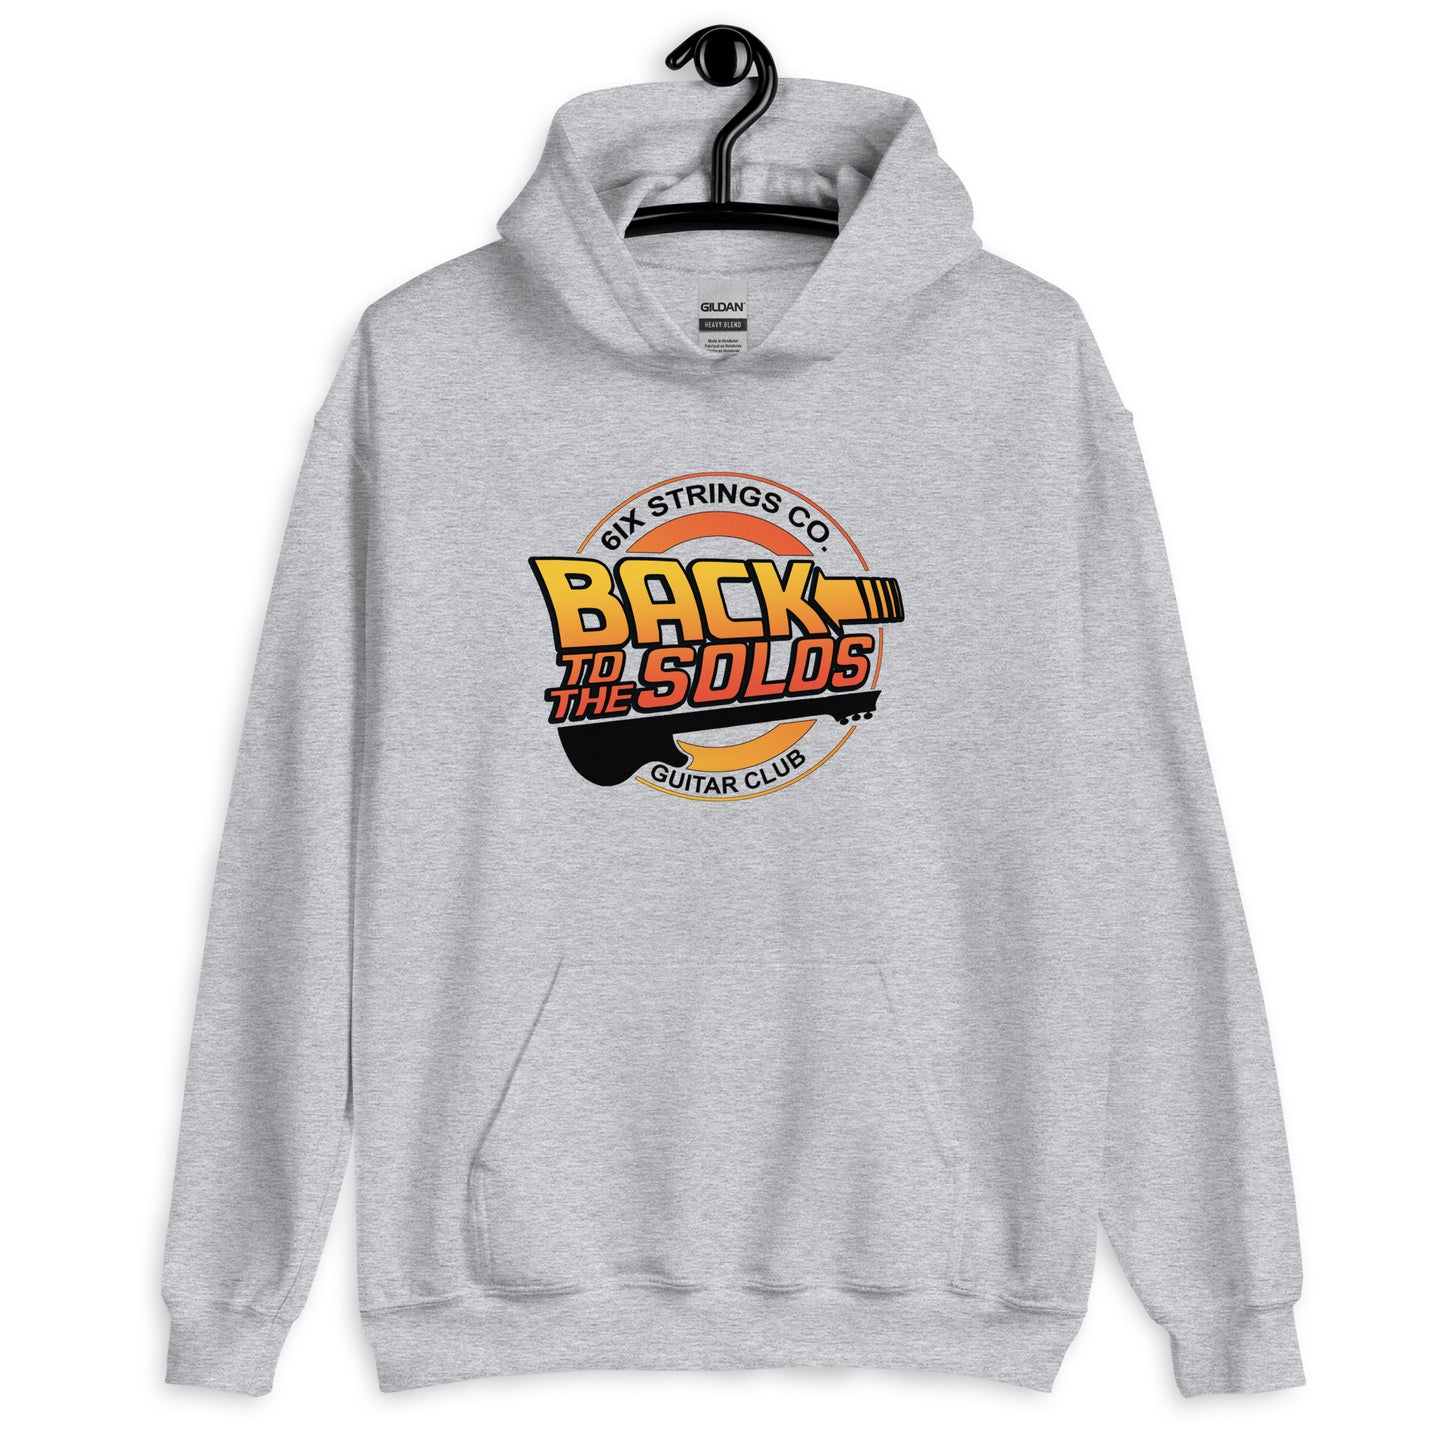 'Back to the Solos' - hoodie